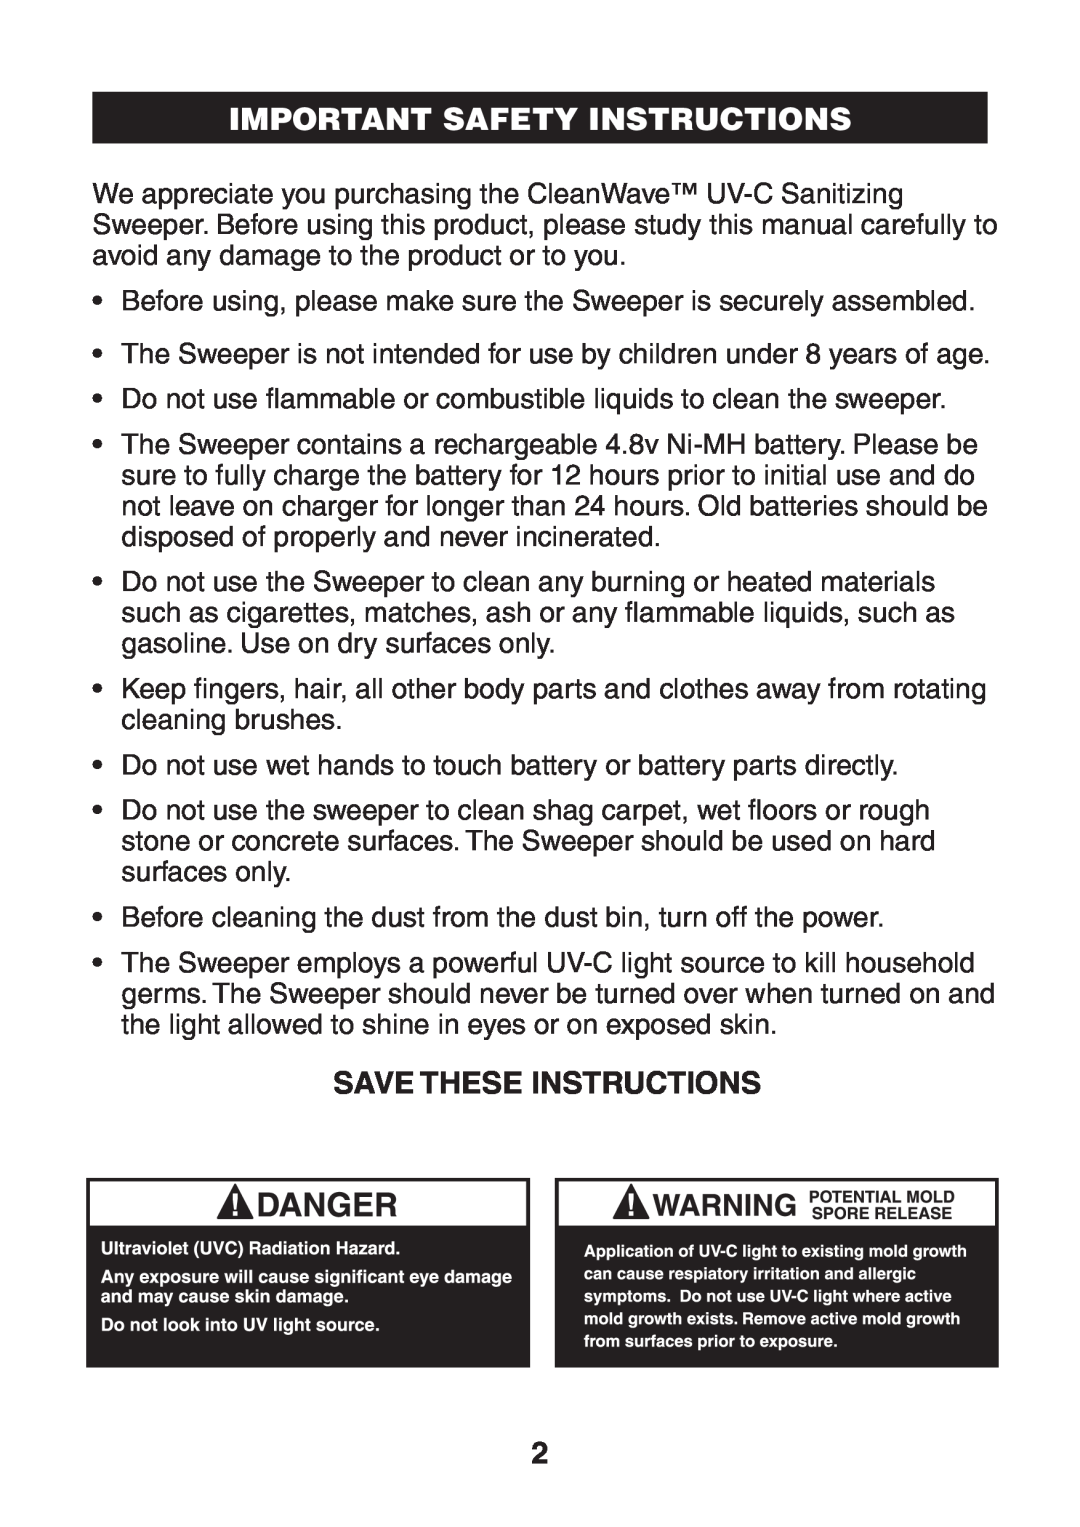 Verilux UV-C manual Important Safety Instructions, Save These Instructions 